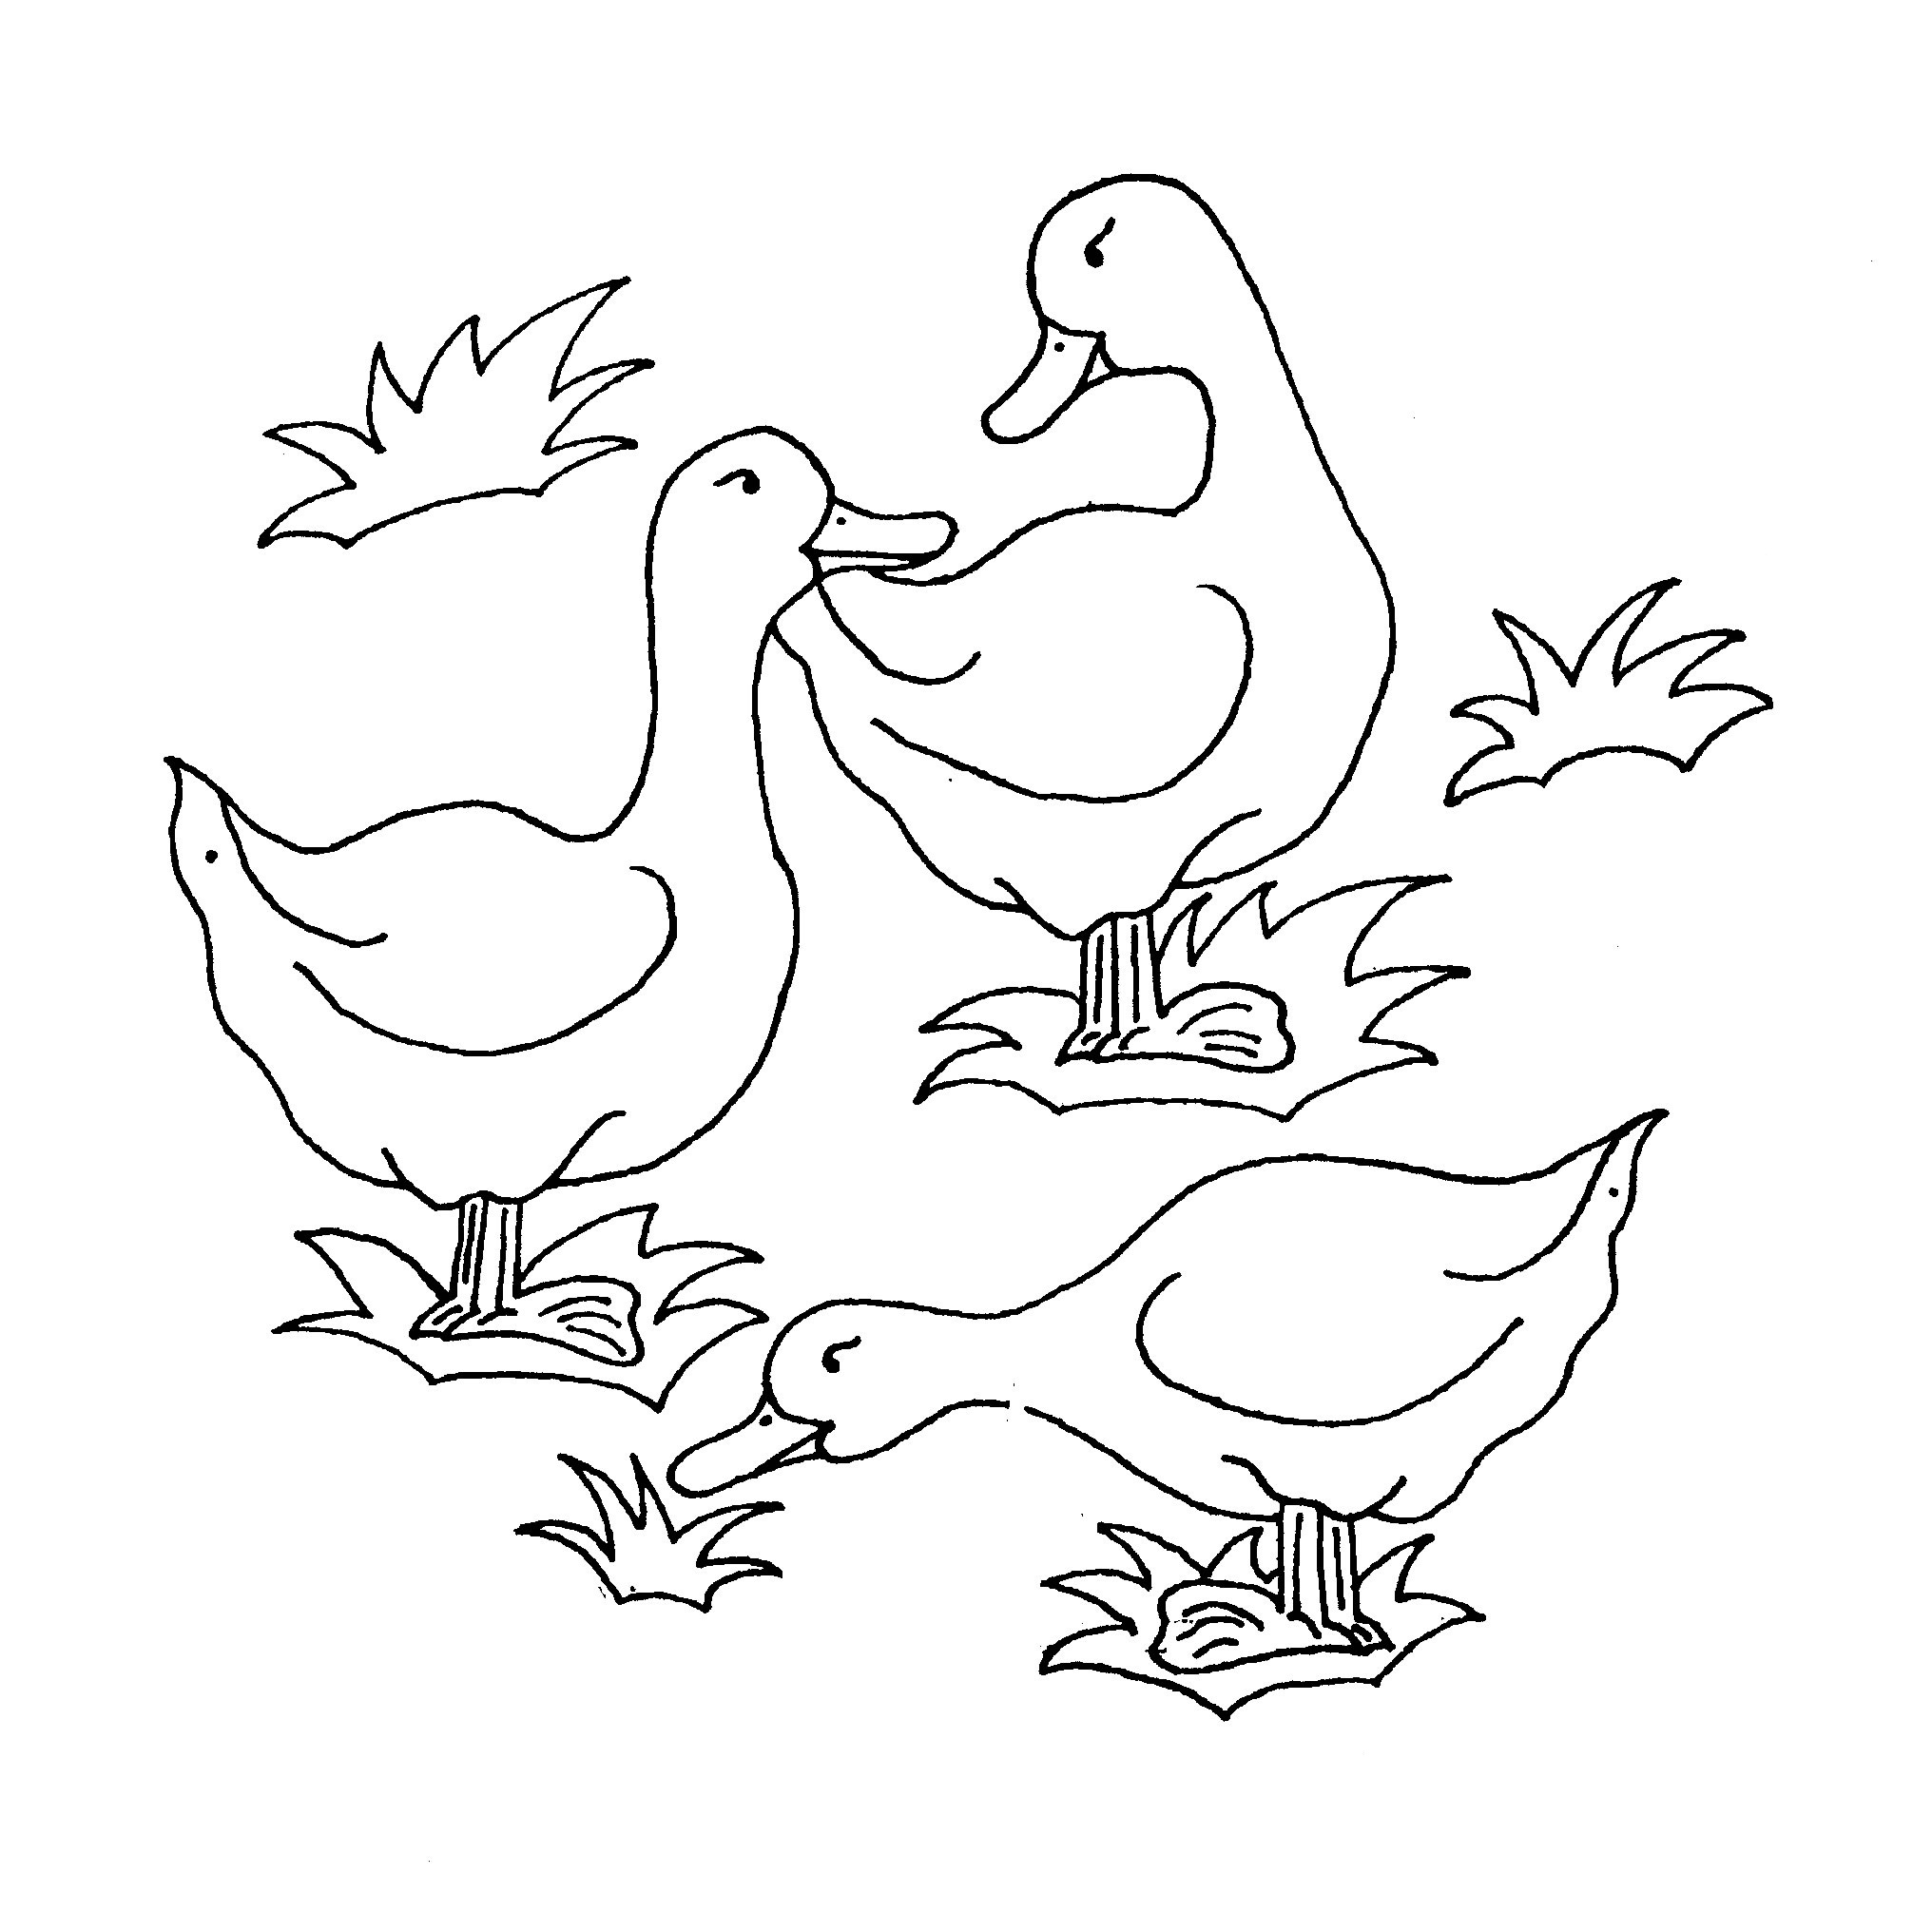 Download Coloring Page of Ducks - Animal Place